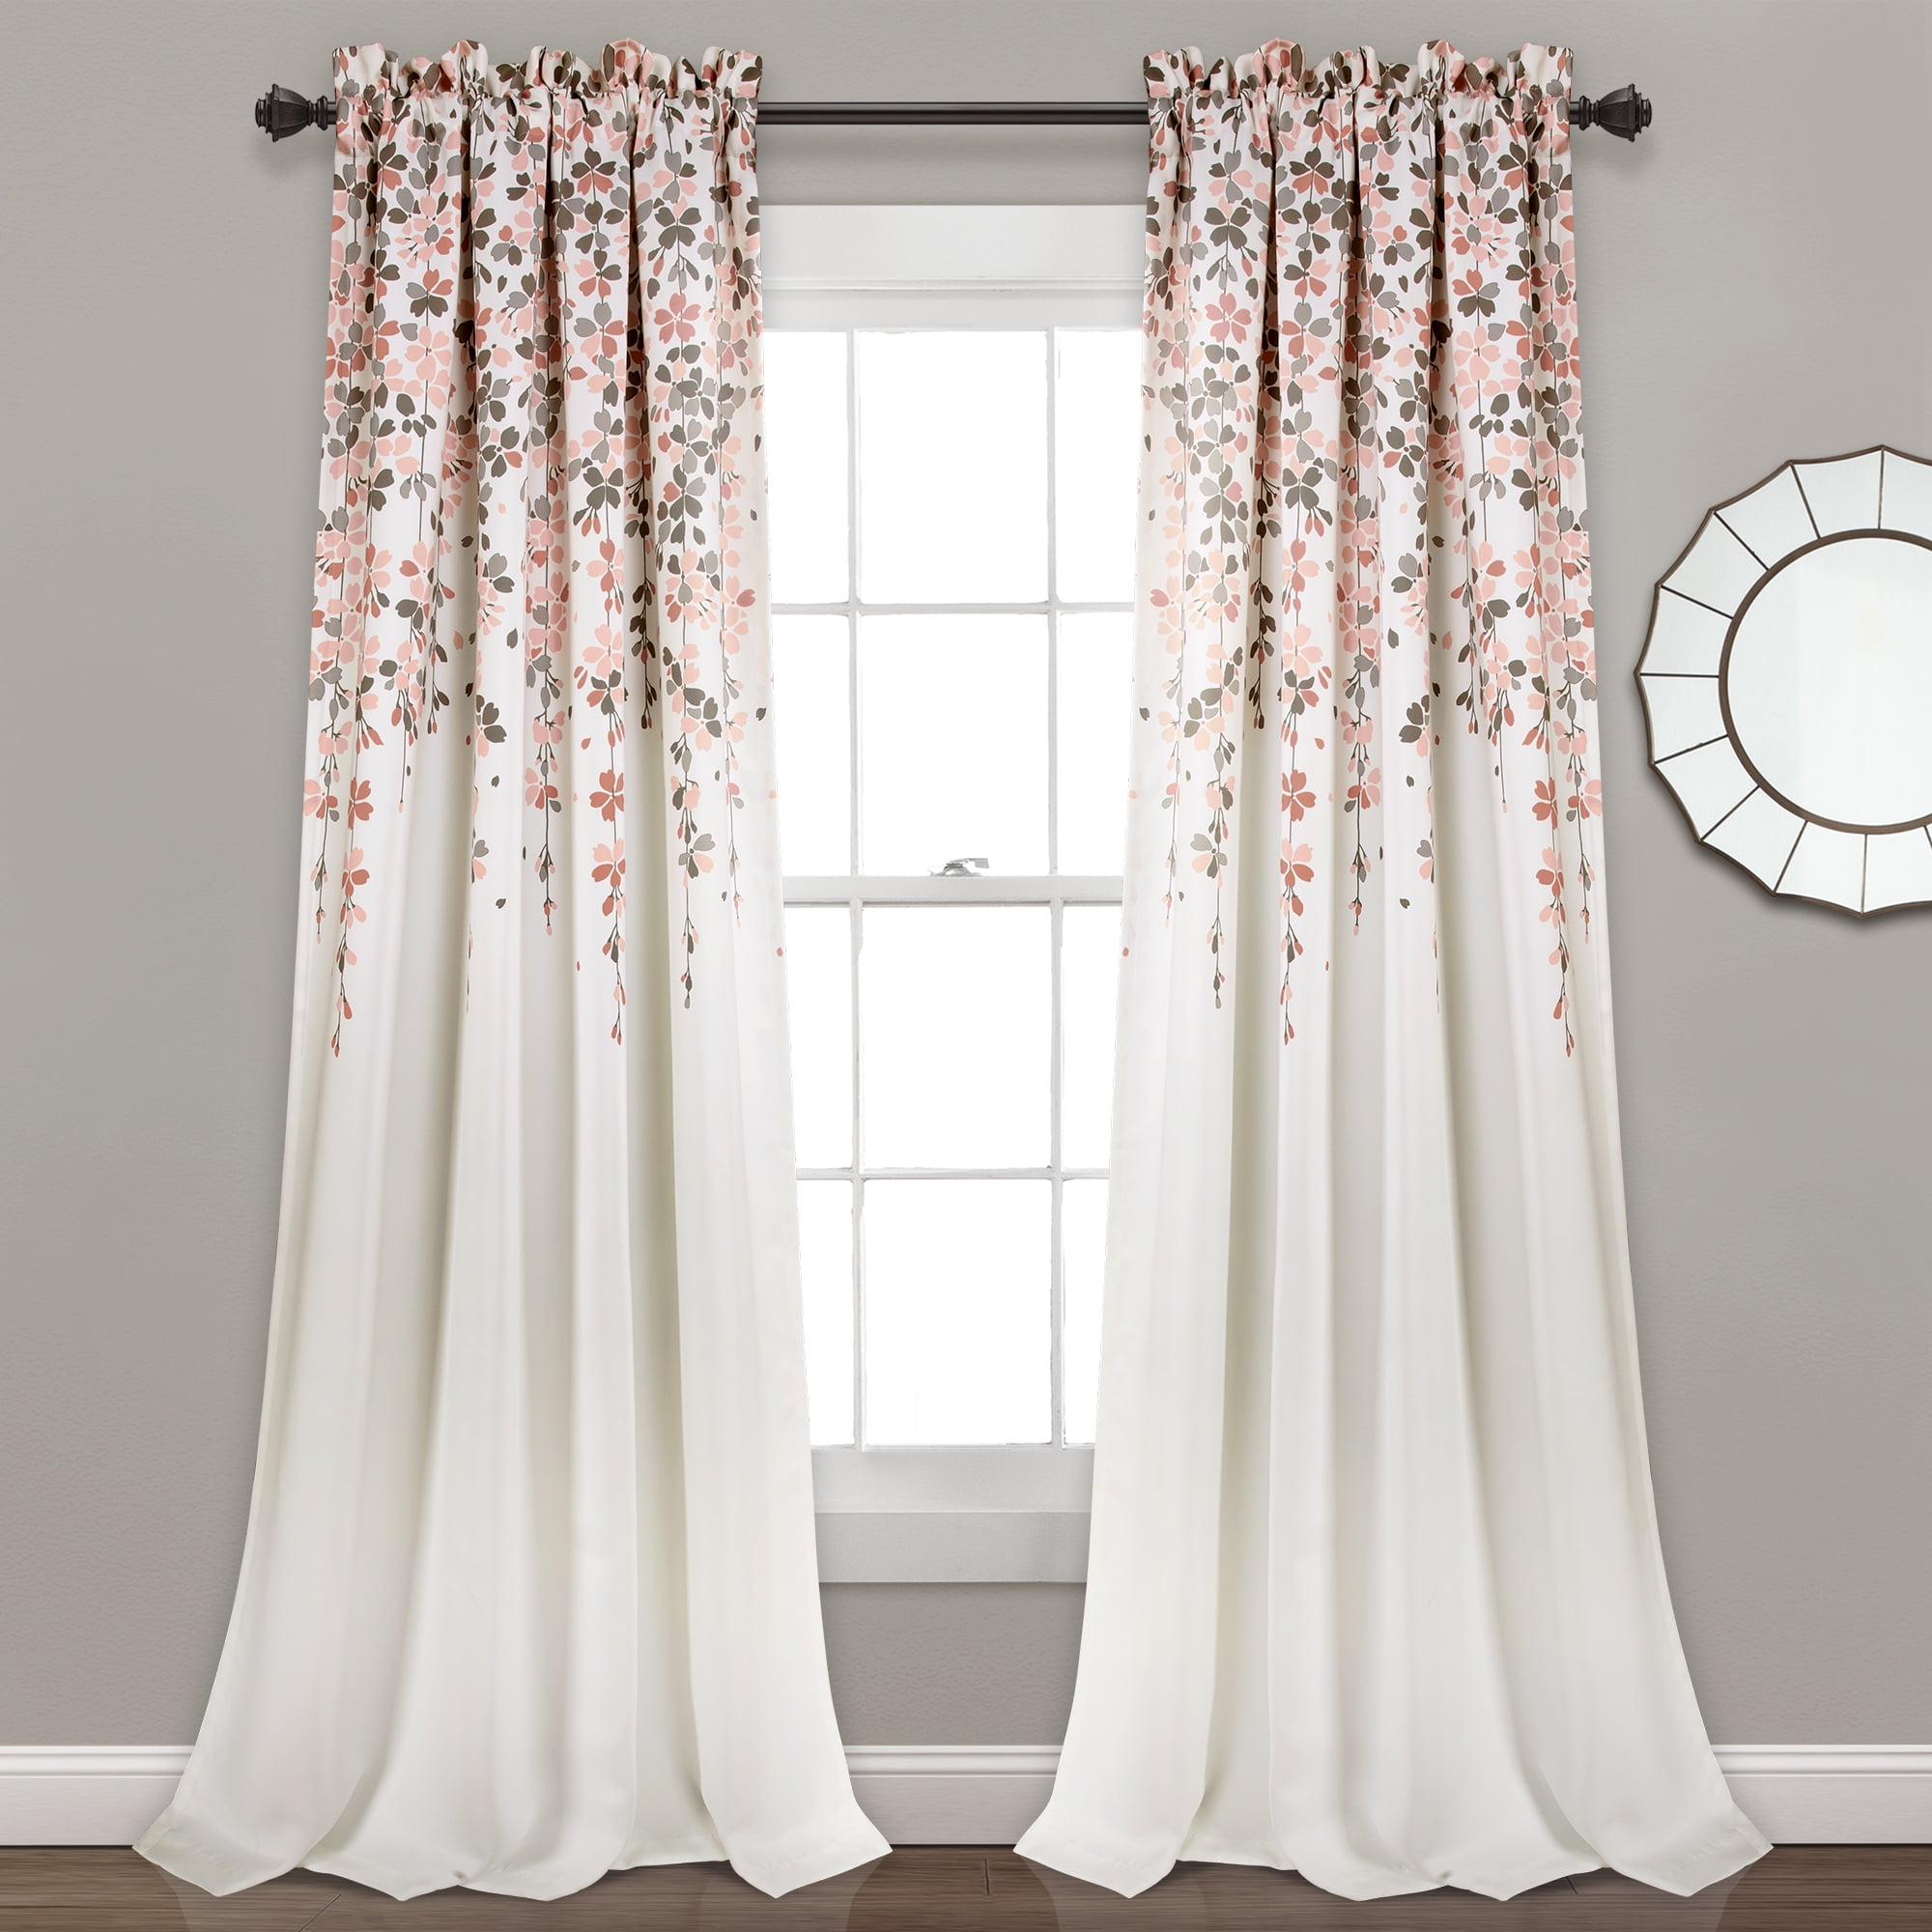 Details about   ONE LACE FANCY CURTAIN PANEL & VALANCE COMBO Scalloped 63" x 87" PINK Free Ship! 